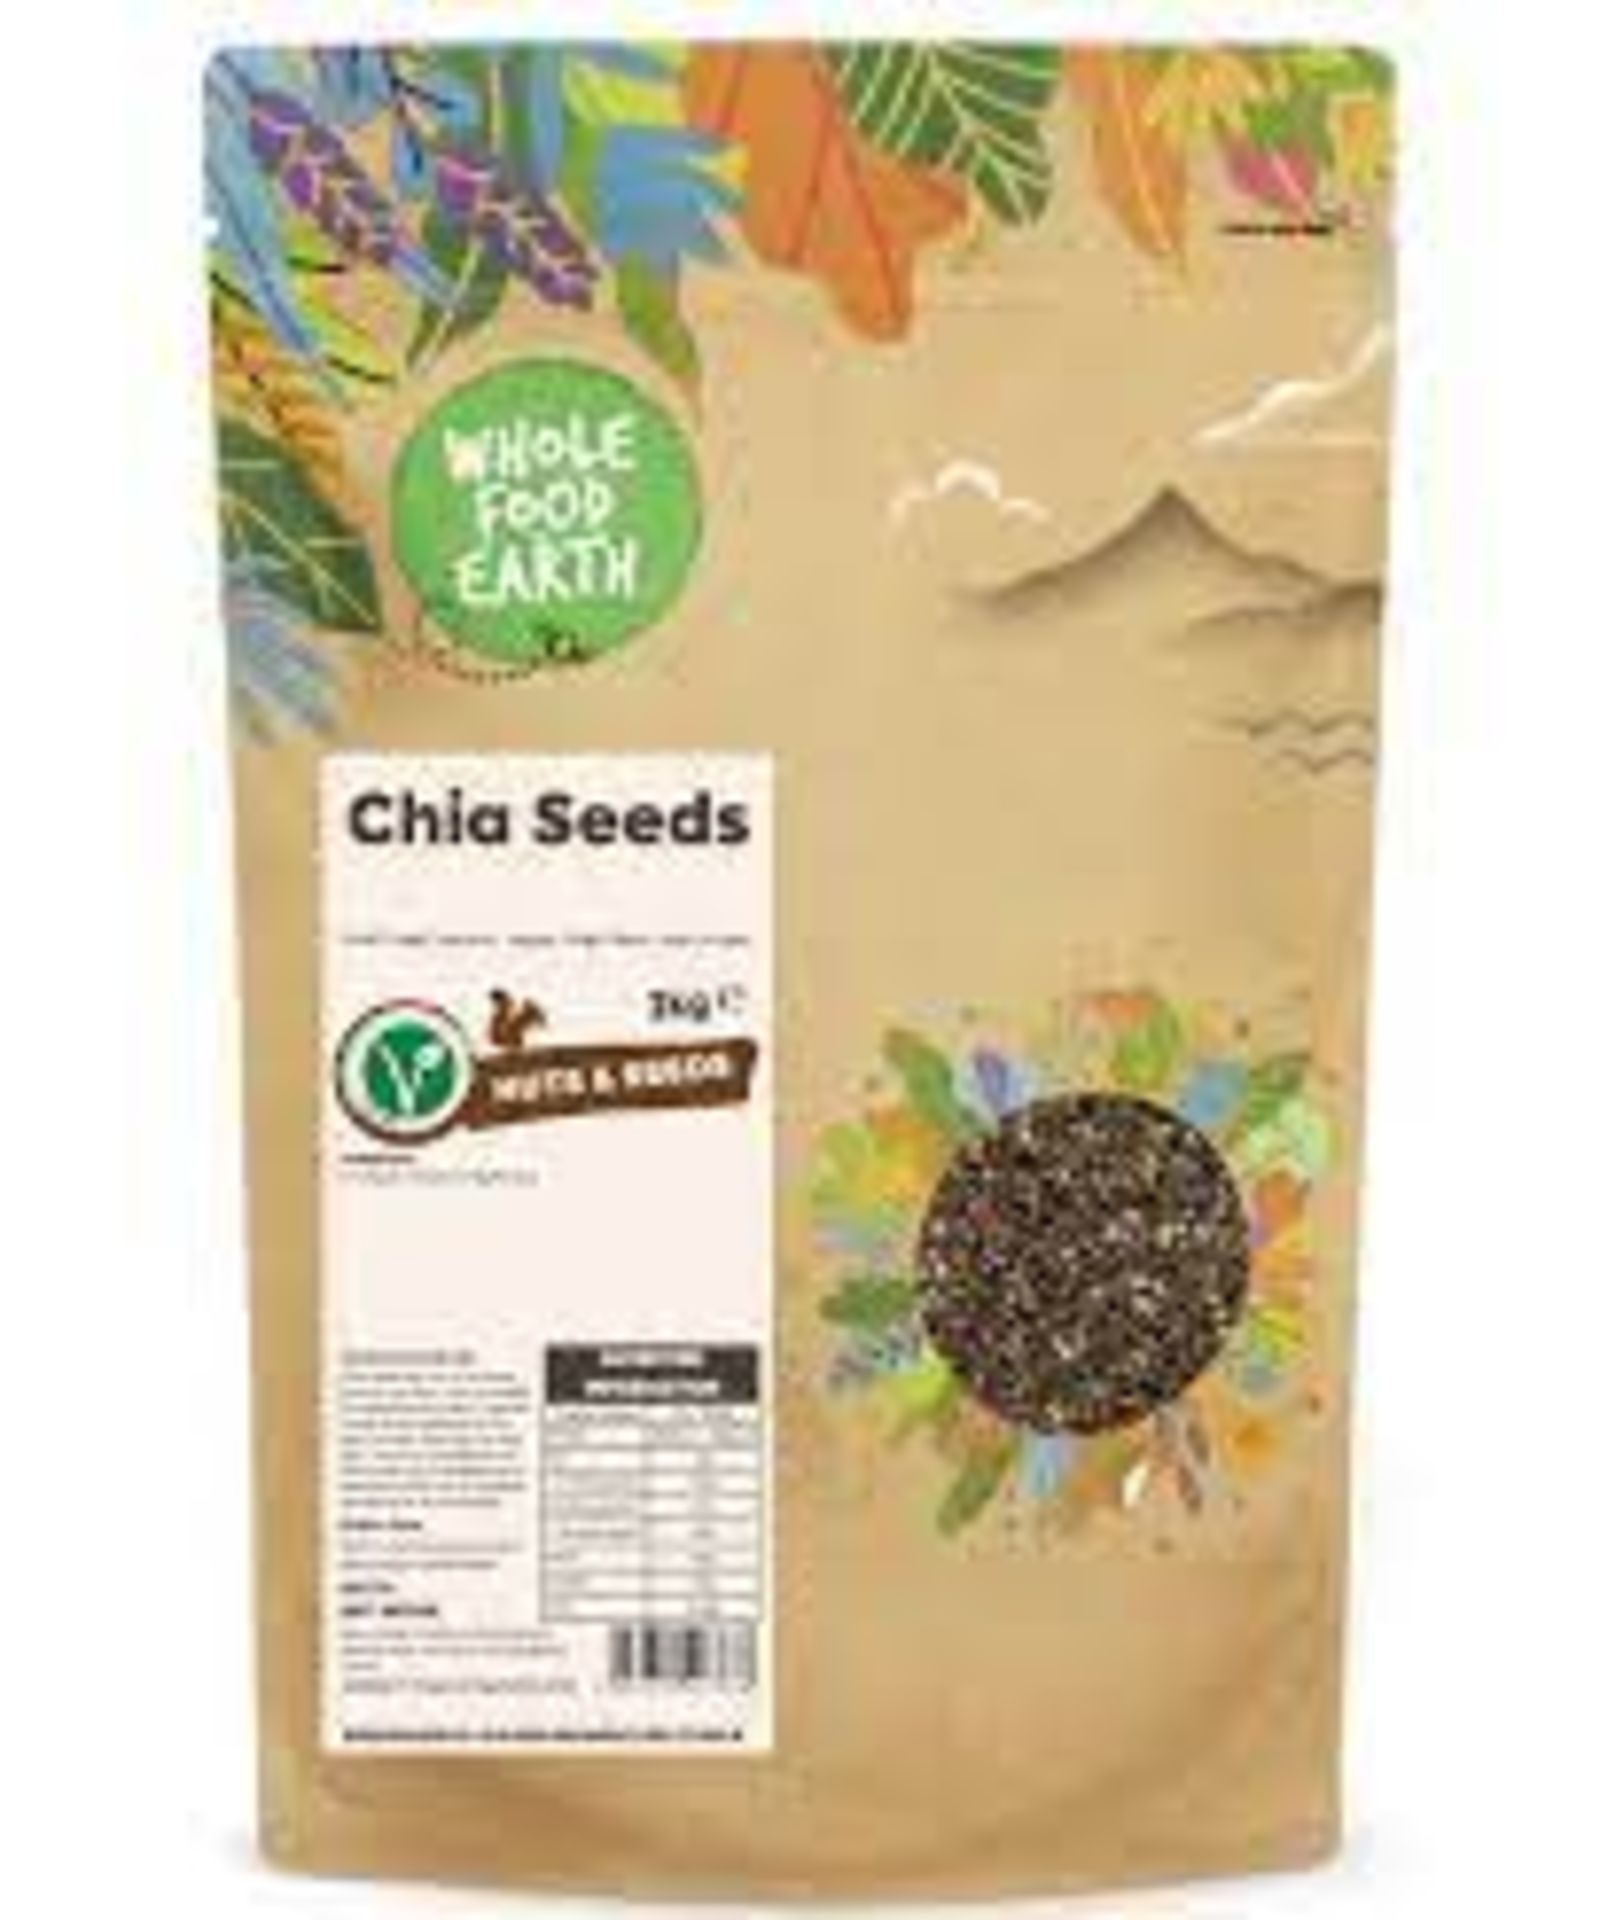 RRP £1073 (Approx. Count 52) spW37c7815t (2)  45 x Wholefood Earth Chia Seeds 2kg   1 x Cadbury